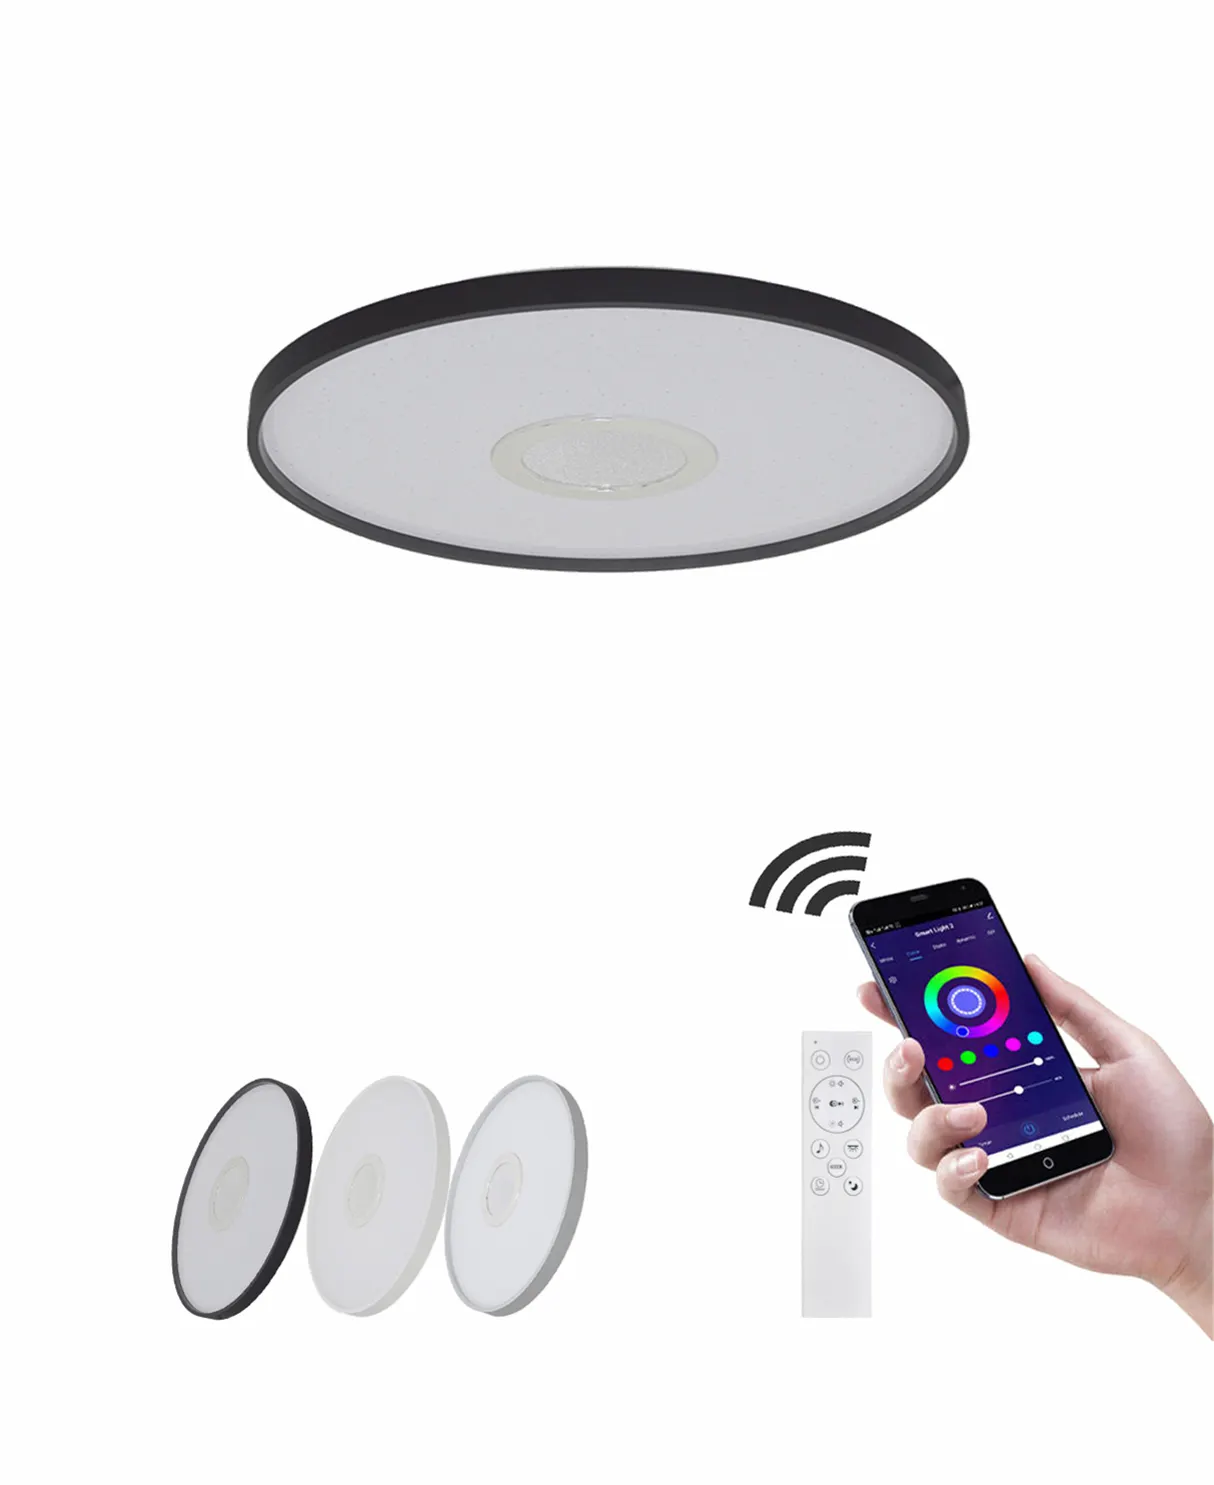 Acrylic Cover 36W Modern Design Led Ceiling Light Hotel Office Bedroom Decken Leuchte Led 15 Inch Round Dimmable Ceiling Light